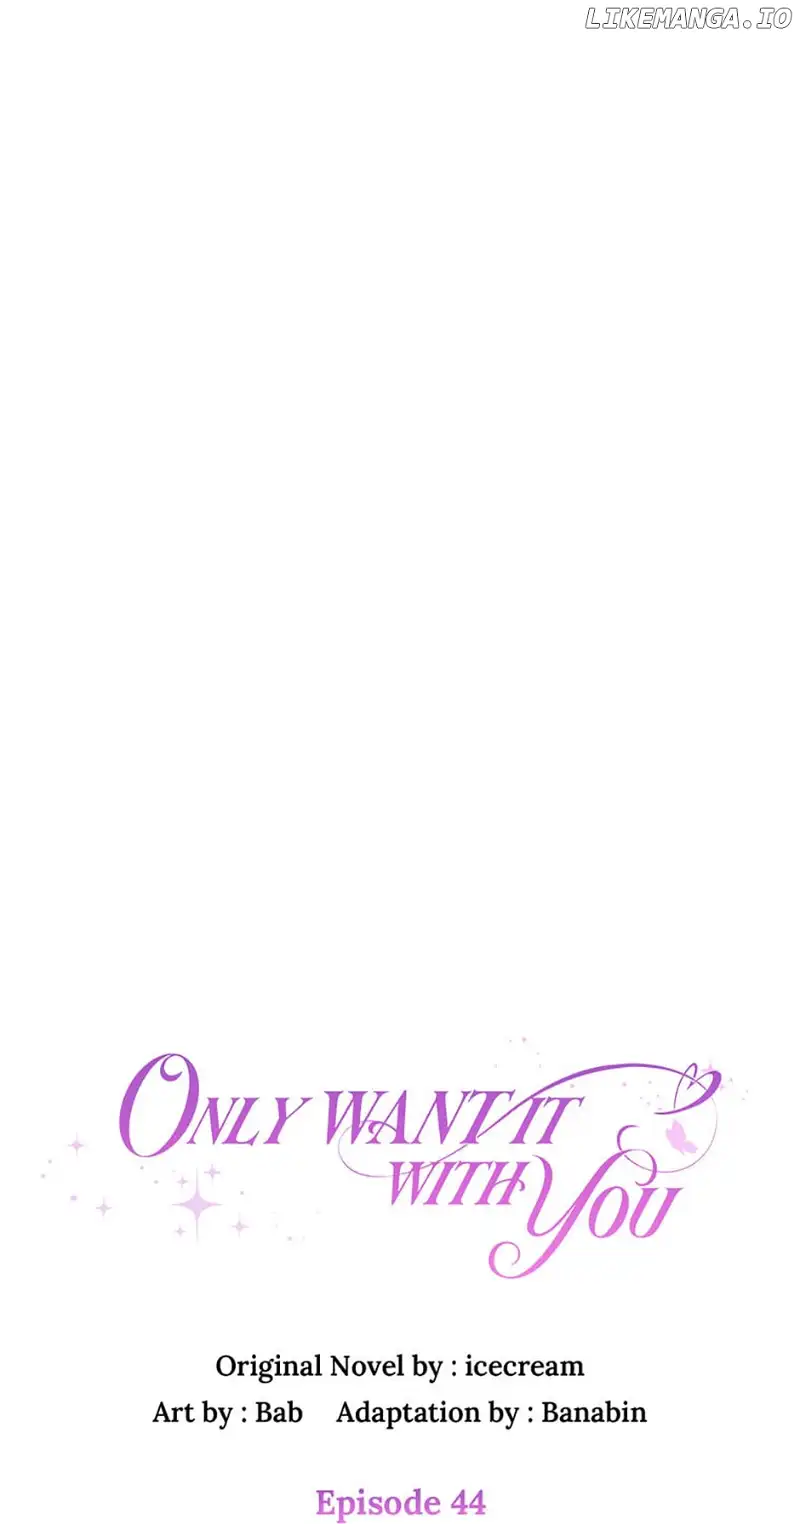 Only Want It With You - 44 page 14-05819ee9